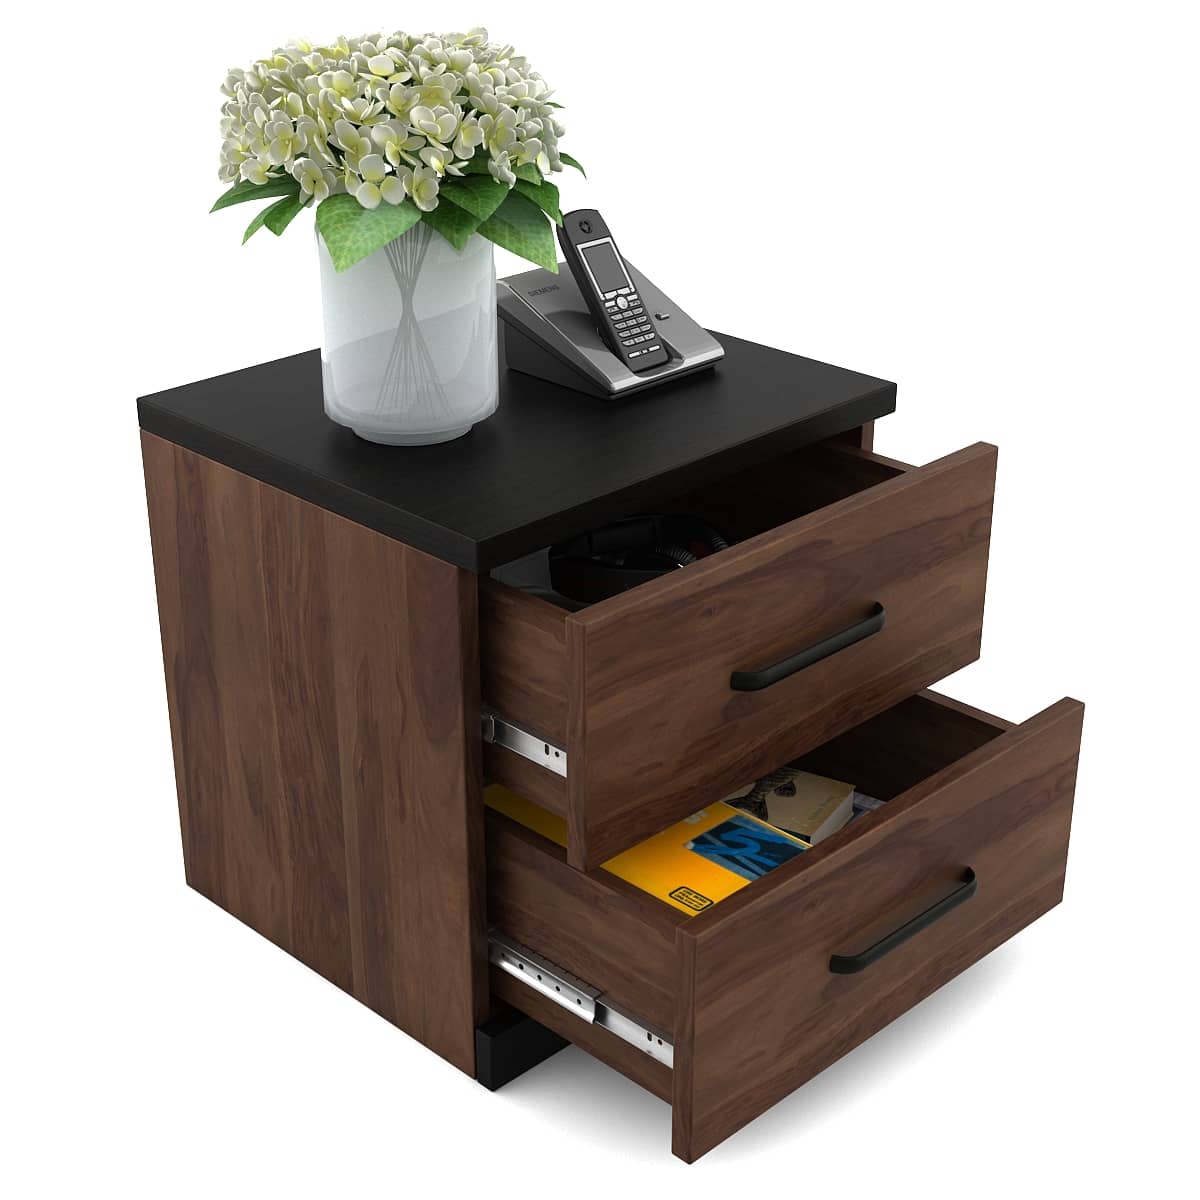 Spacewood Bedside Boston Bed Side Table In Sheesham Finish